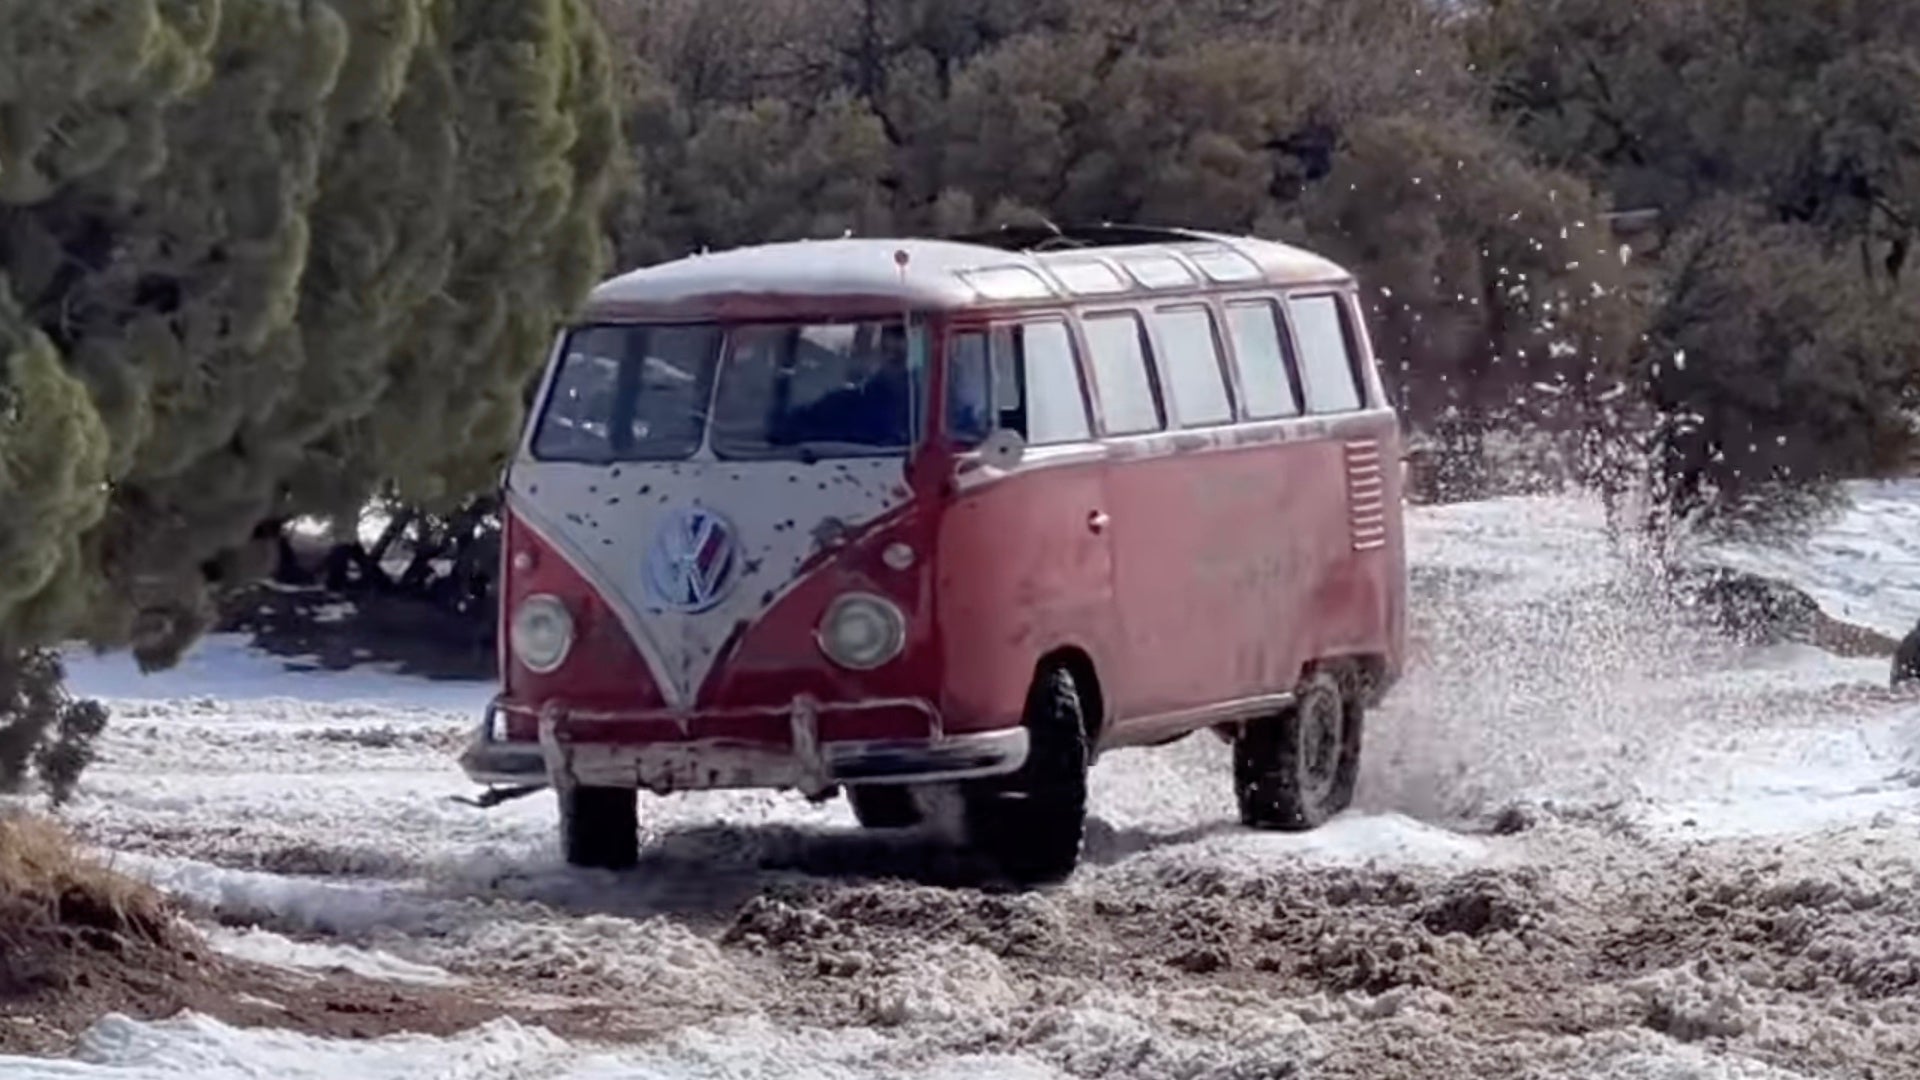 https://www.thedrive.com/content/2022/01/vw-bus-off-roading.jpg?quality=85